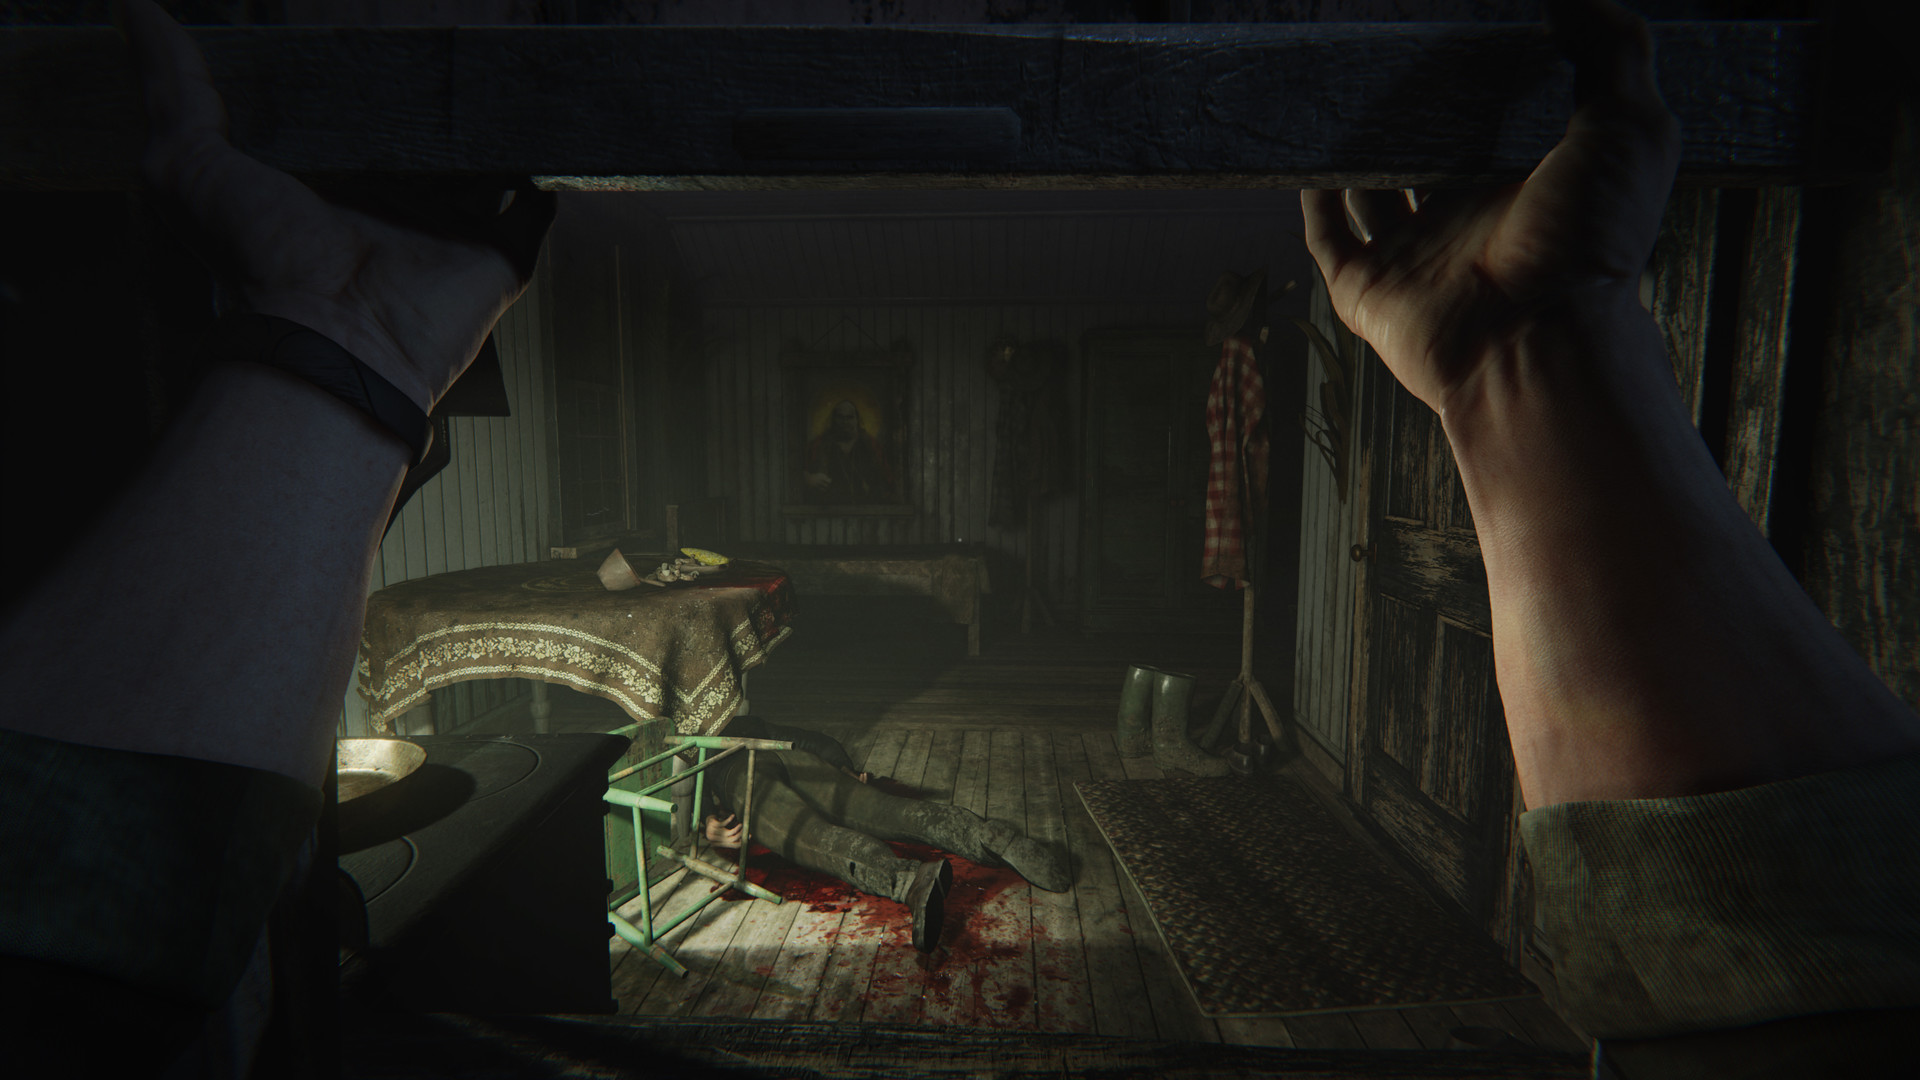 outlast 2 pc download size